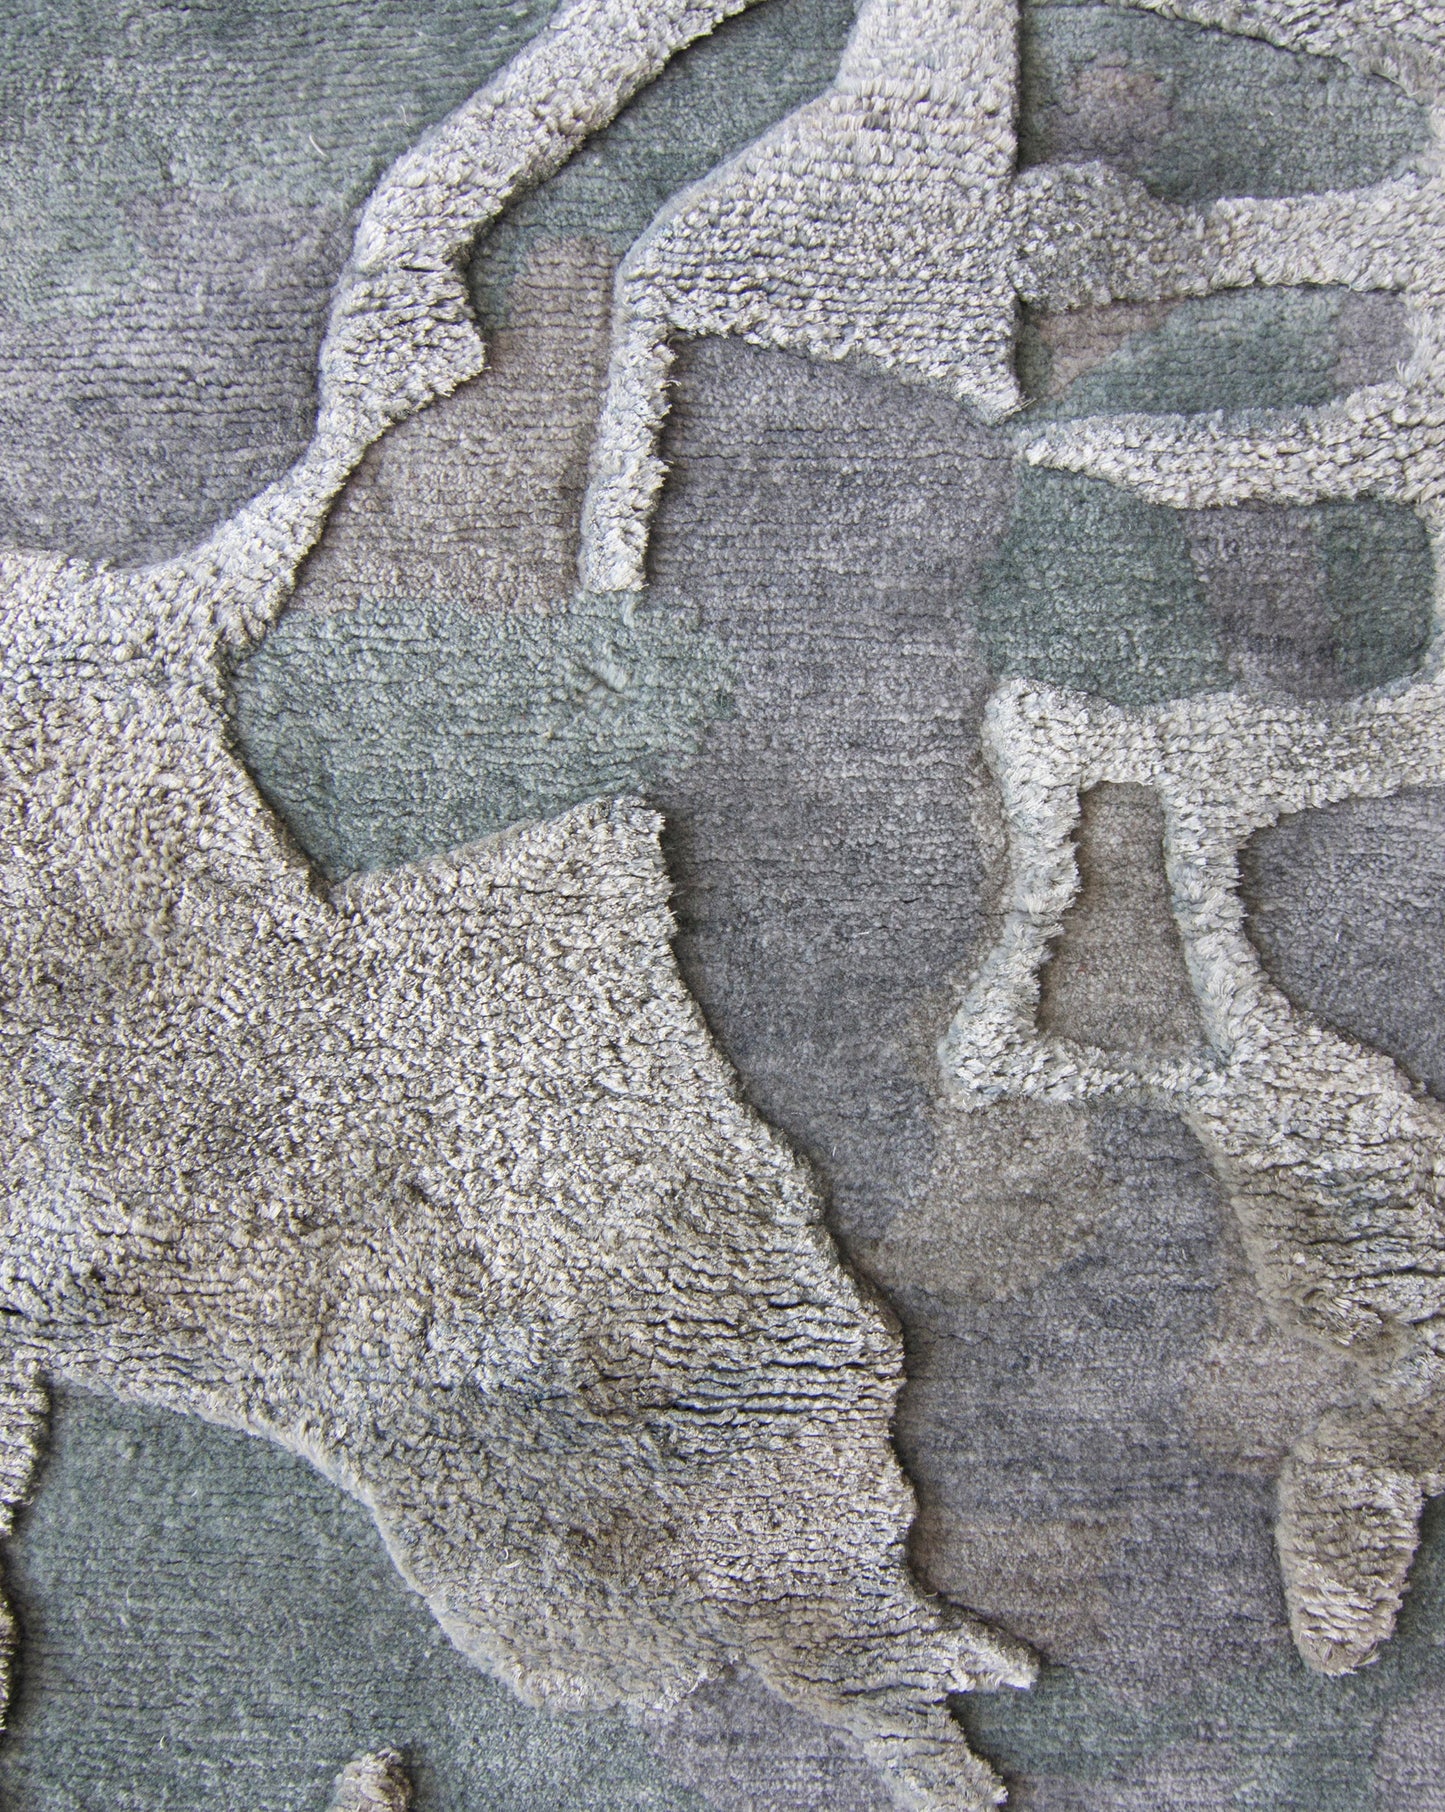 An image of a Kotoubia Hand Knotted Rug with a pattern on it